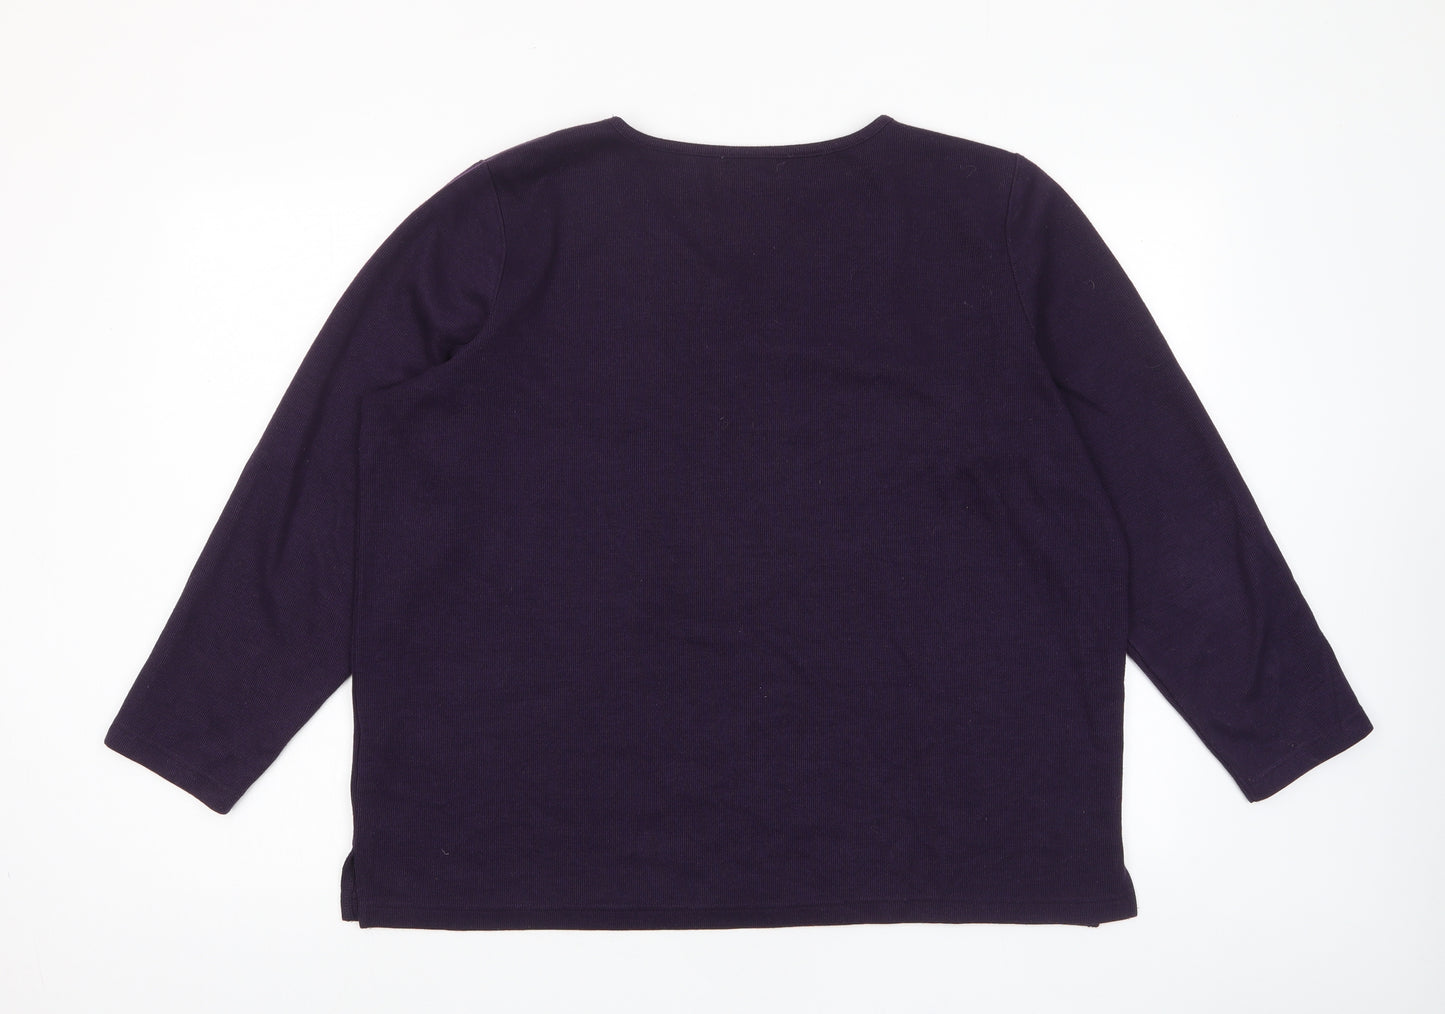 Bonmarché Womens Purple V-Neck Polyester Pullover Jumper Size L - Embroided